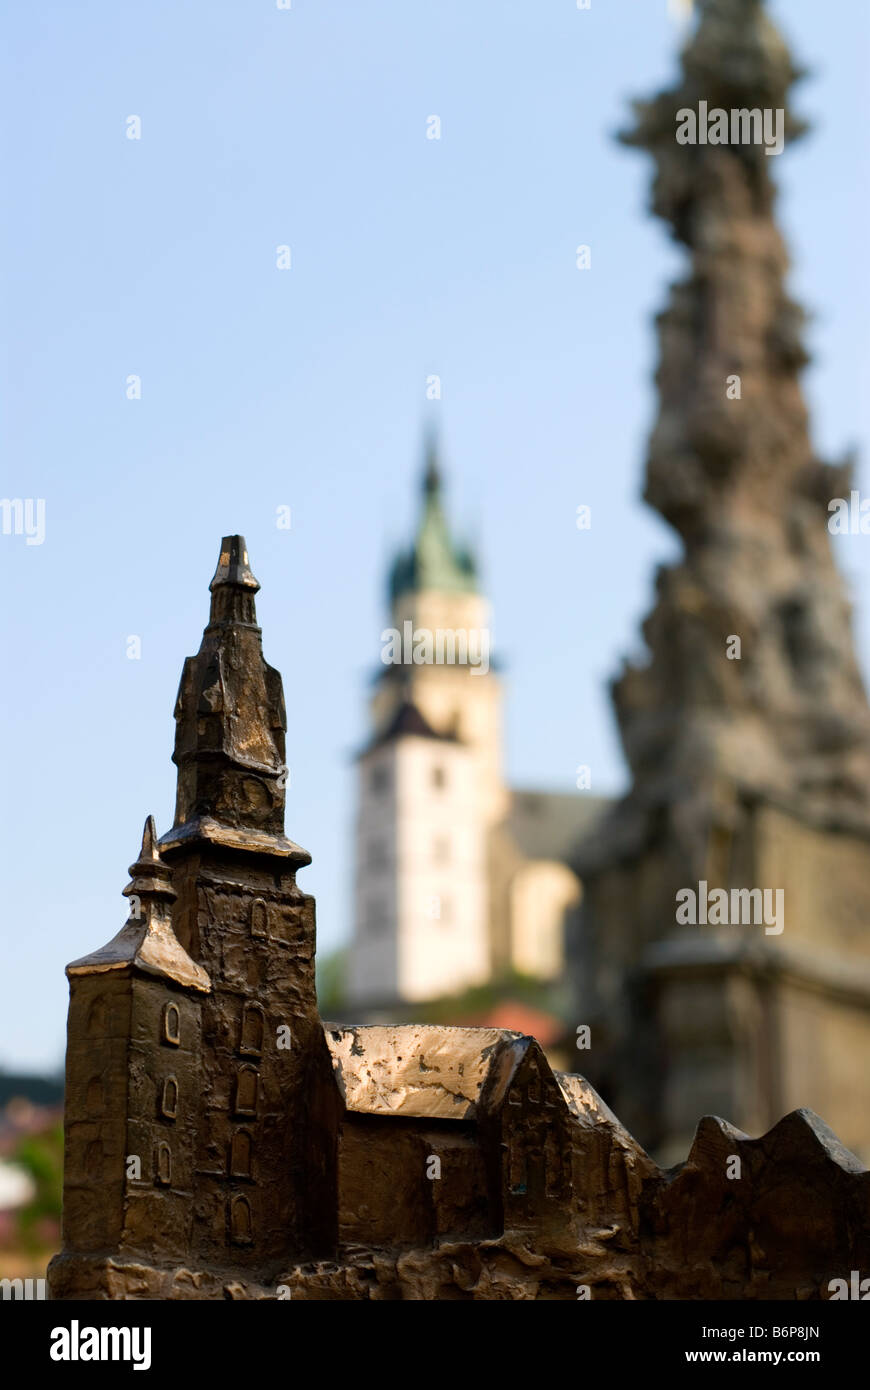 Close up of a bronze sculpture that resembles the castle of Kremnica Stock Photo